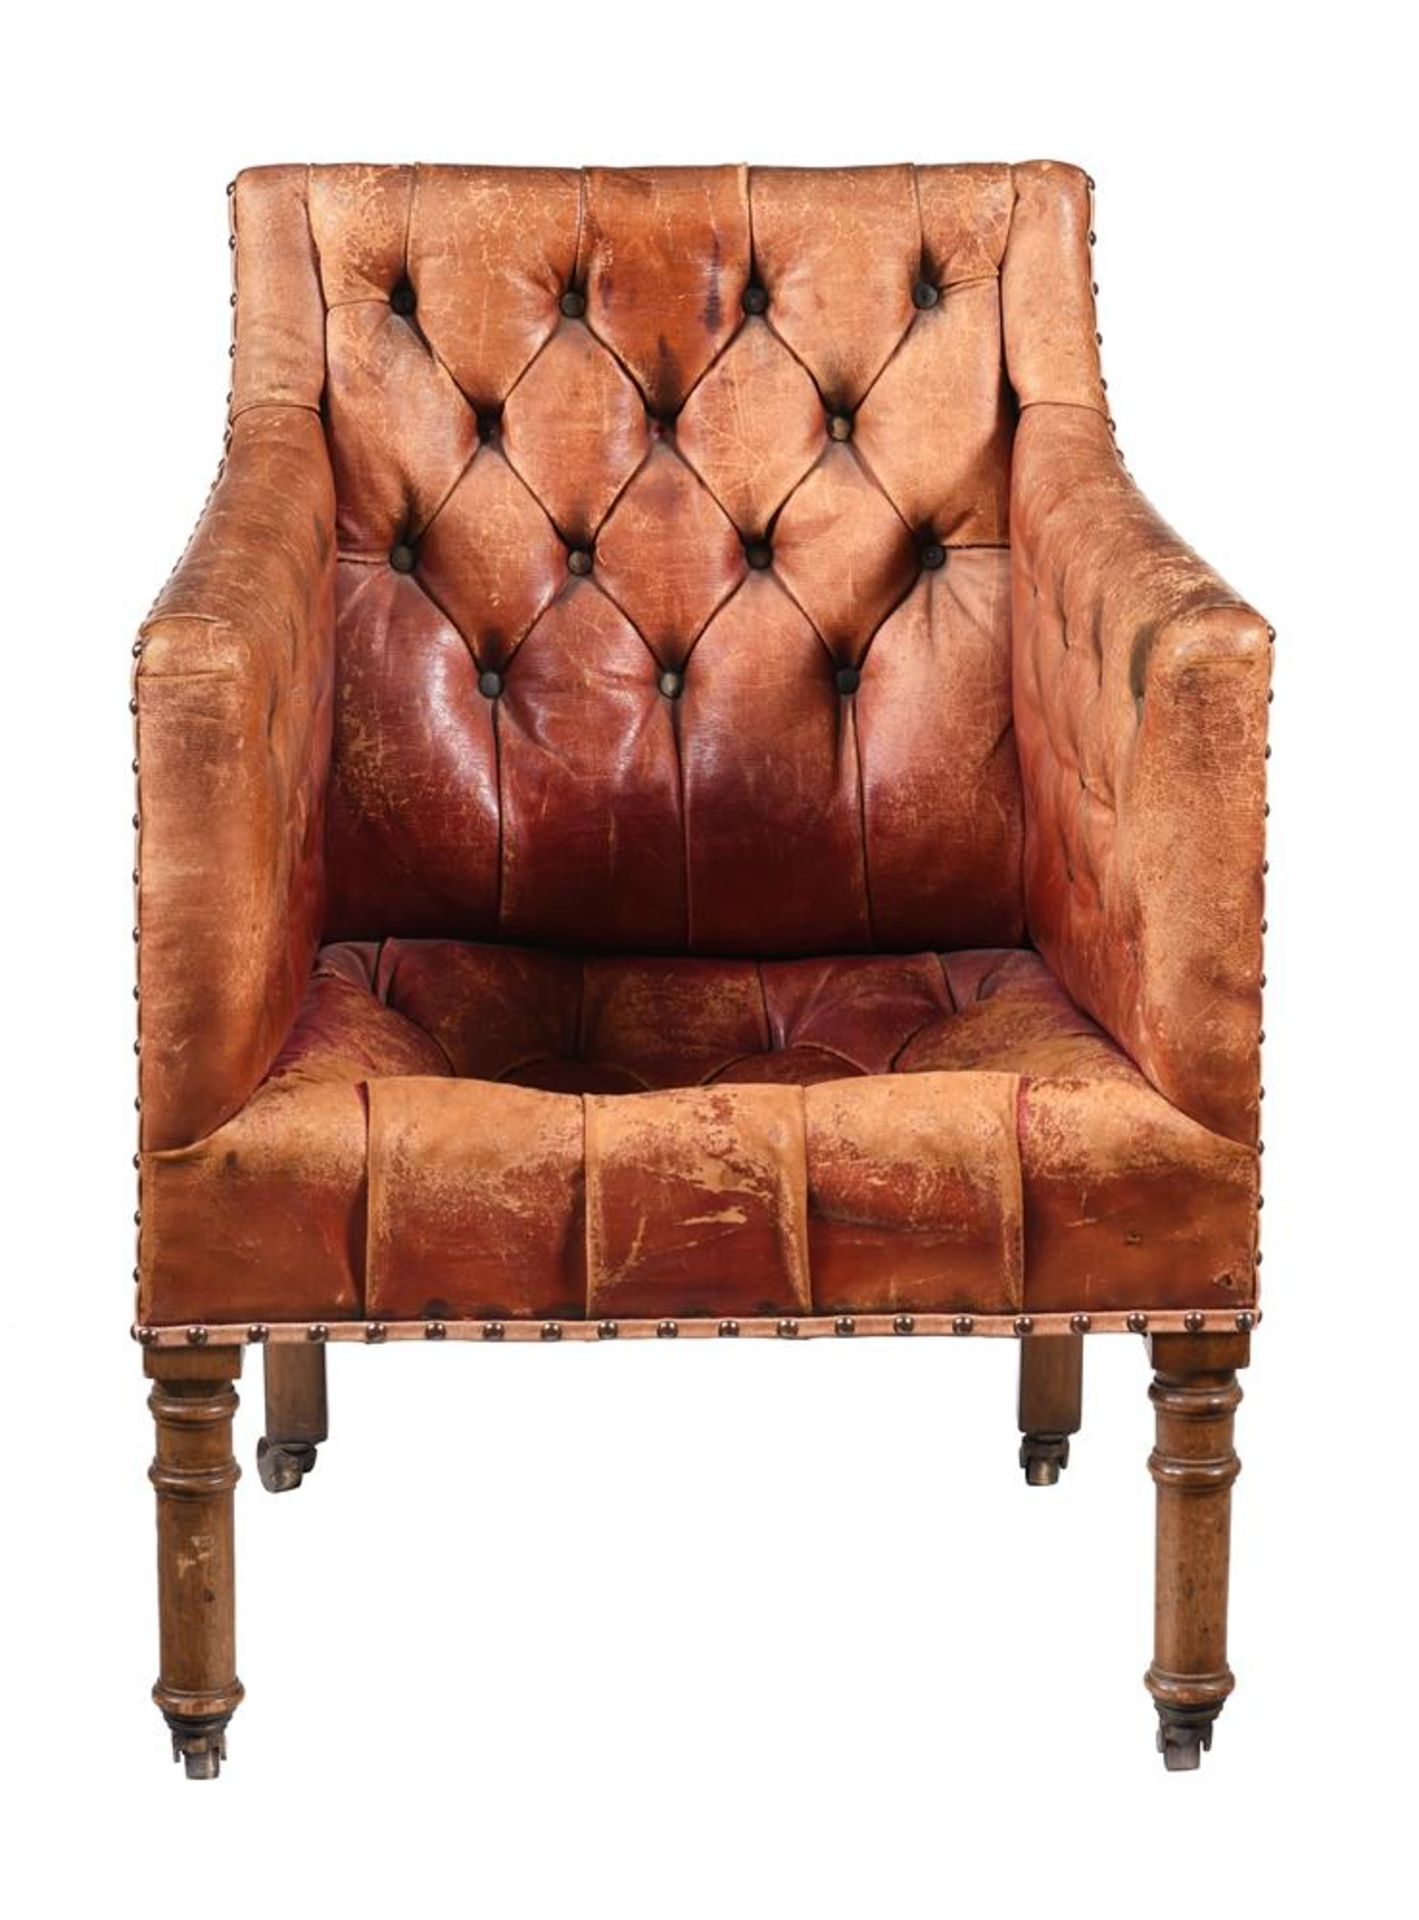 A MAHOGANY AND MOROCCO LEATHER LIBRARY ARMCHAIR IN GEORGE III STYLE - Image 2 of 2